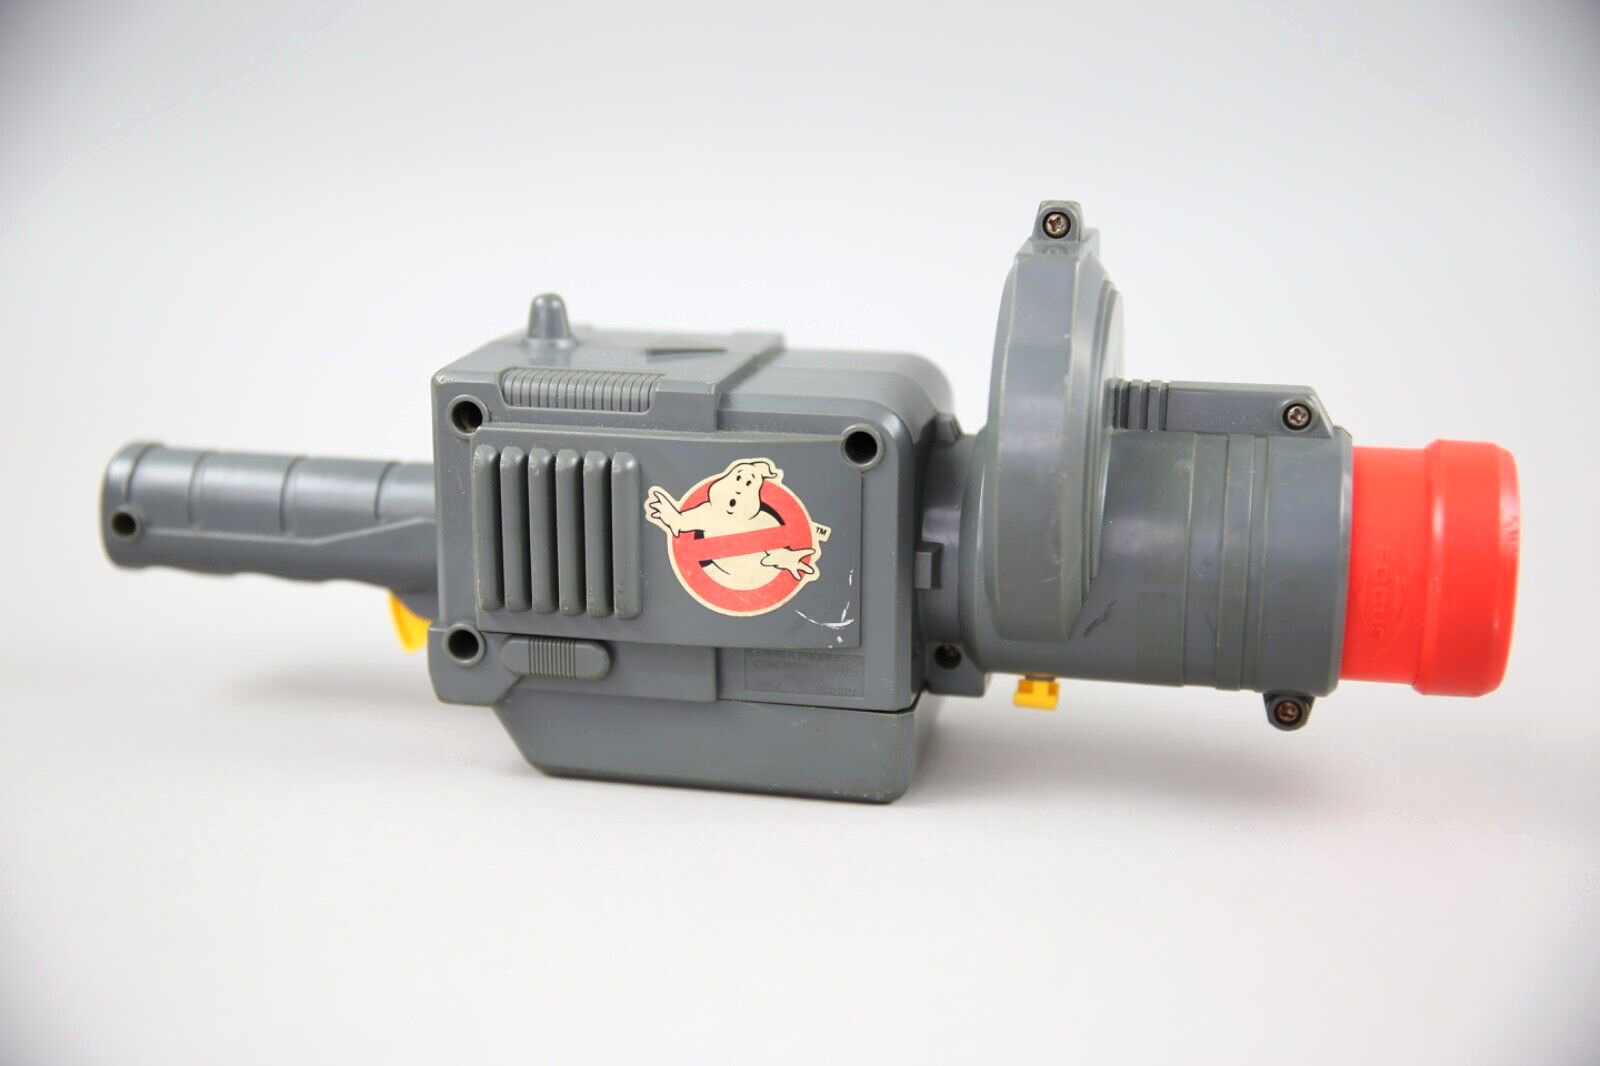 1984 Ghostbusters Ghost Zapper Gun Vintage Kenner toy Works Projector Sounds